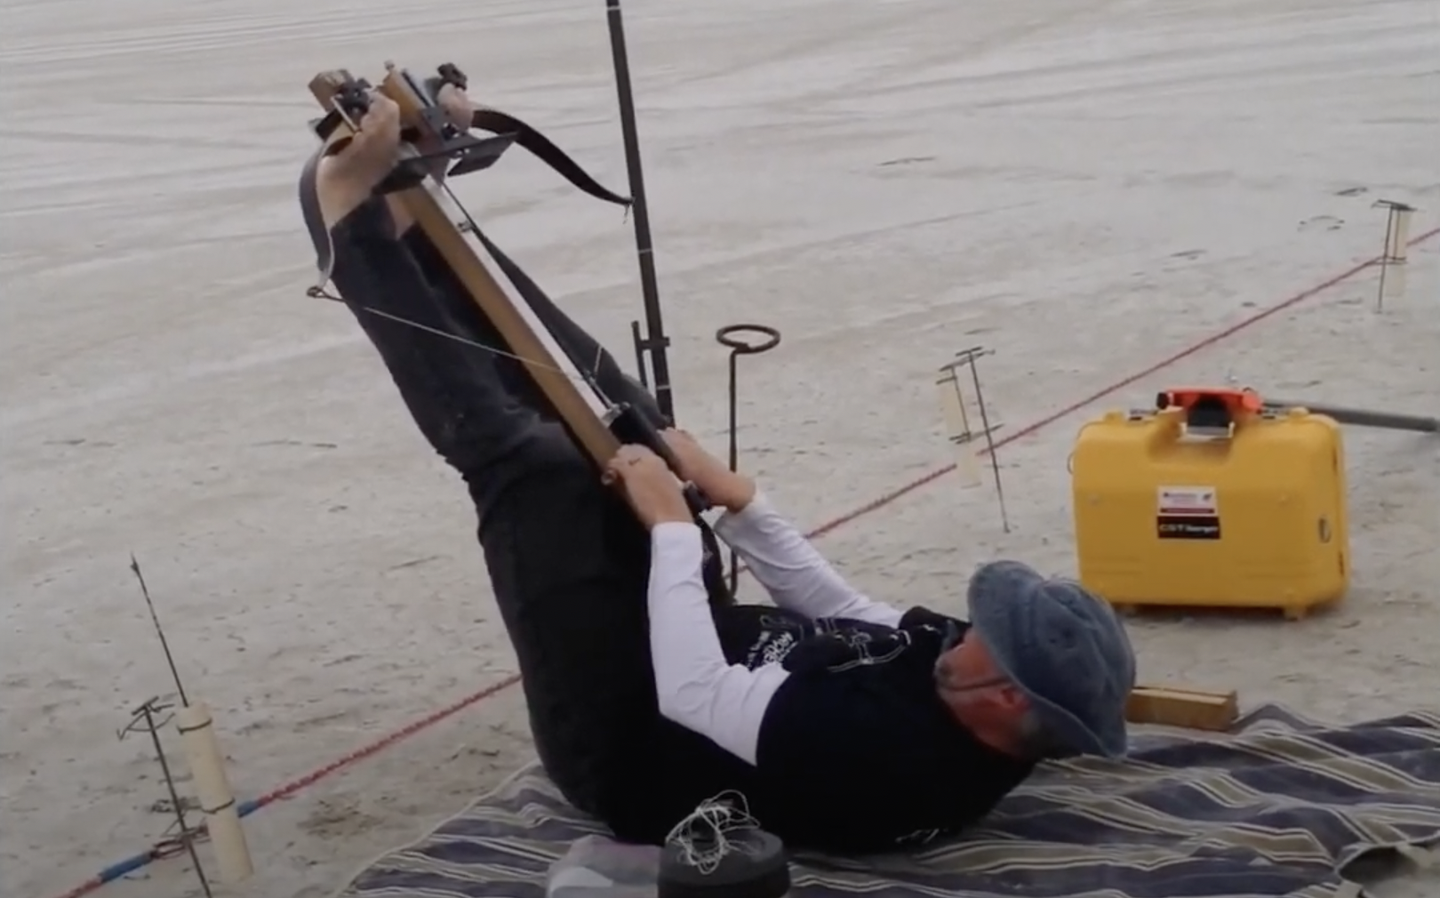 Engineer Attempts to Set New World Record by Shooting an Arrow More Than a Mile